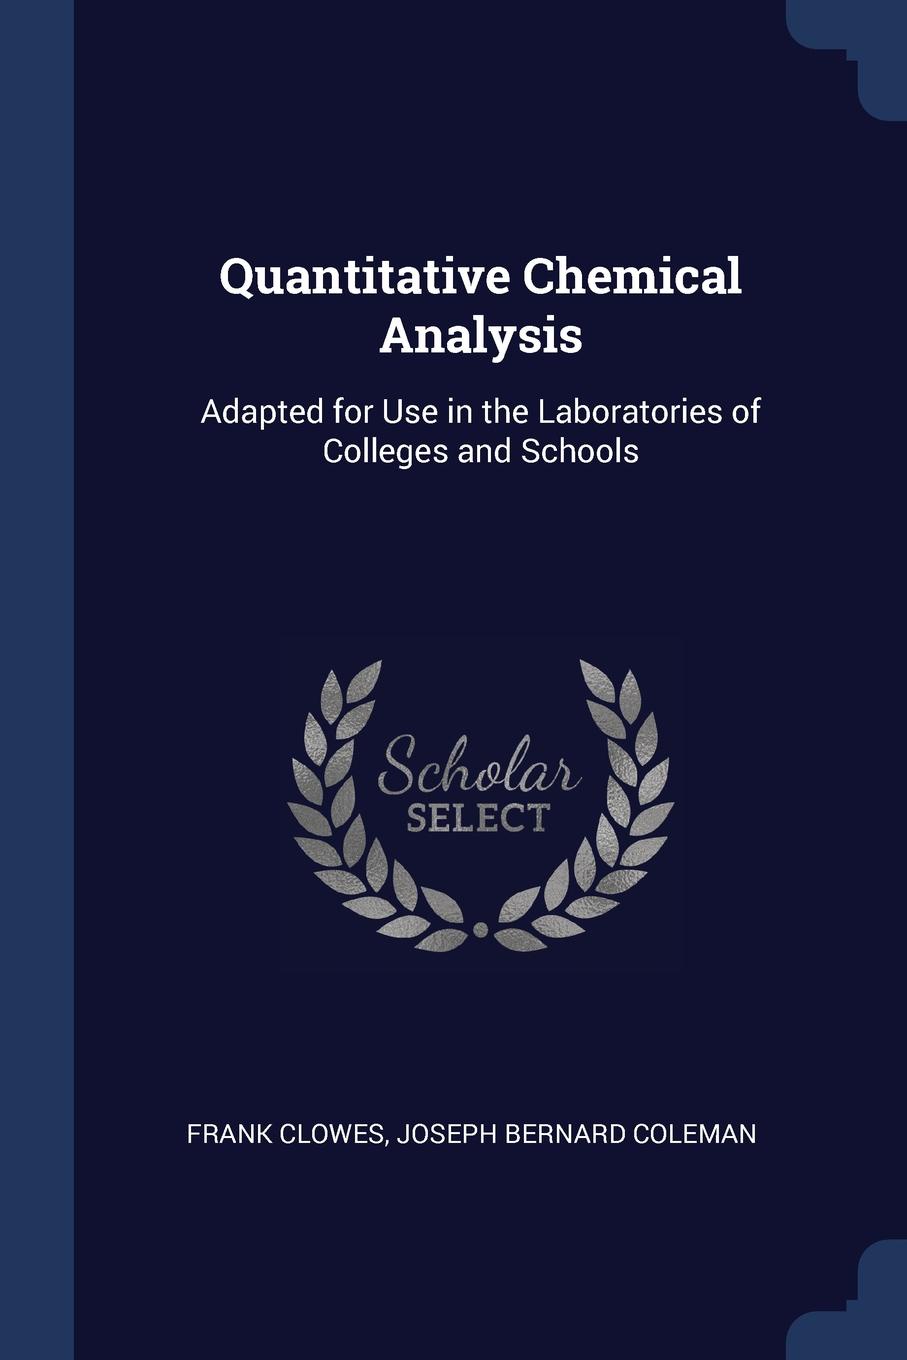 Quantitative Chemical Analysis. Adapted for Use in the Laboratories of Colleges and Schools